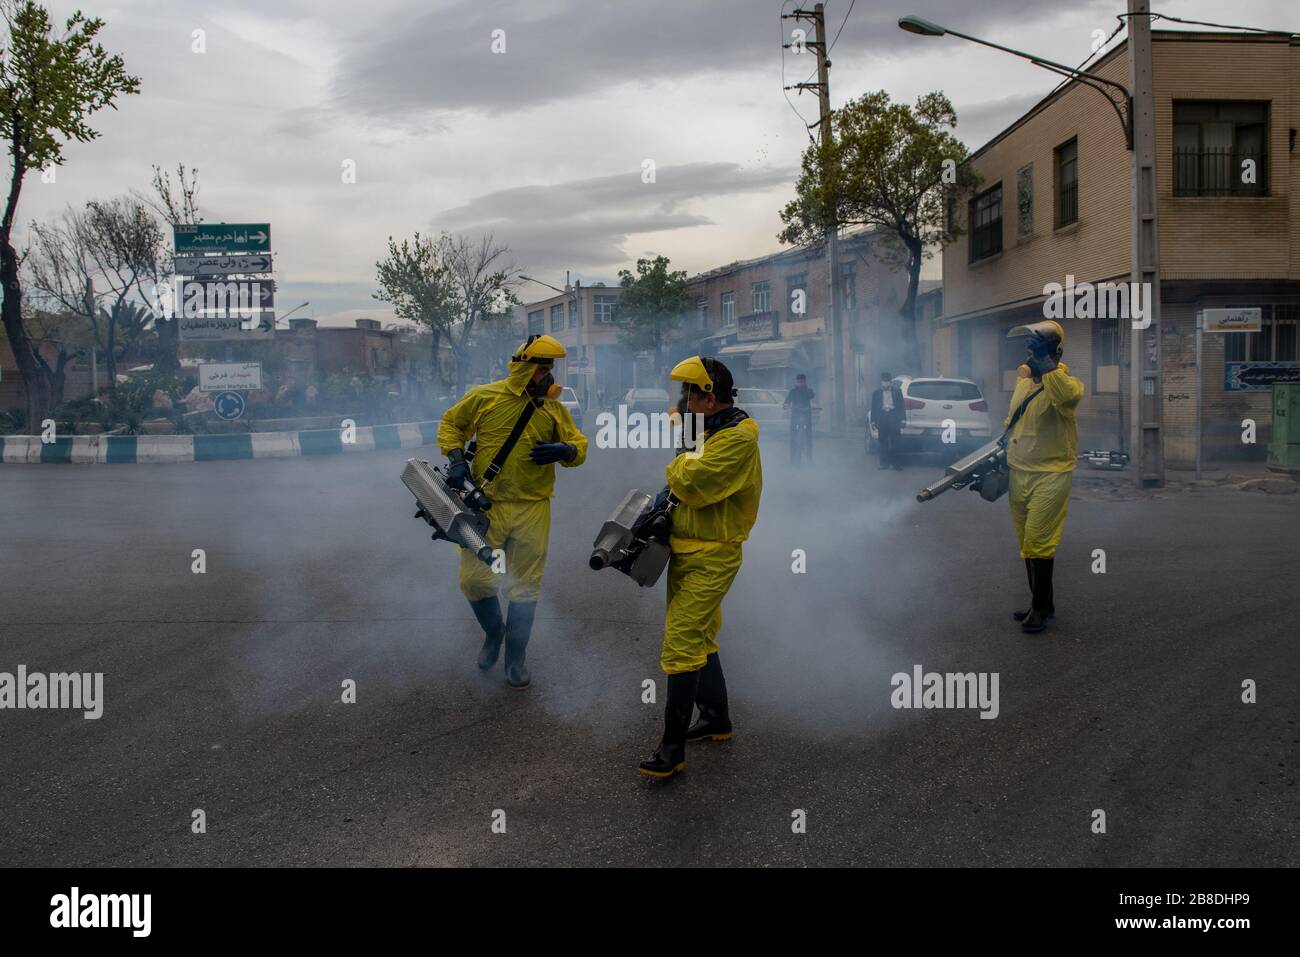 The Iranian health ministry, provincial fire department and municipal staffs disinfect the streets and other public places against Coronavirus using machinery and mobile pumps in Shiraz, Iran, Mar. 2020. Stock Photo